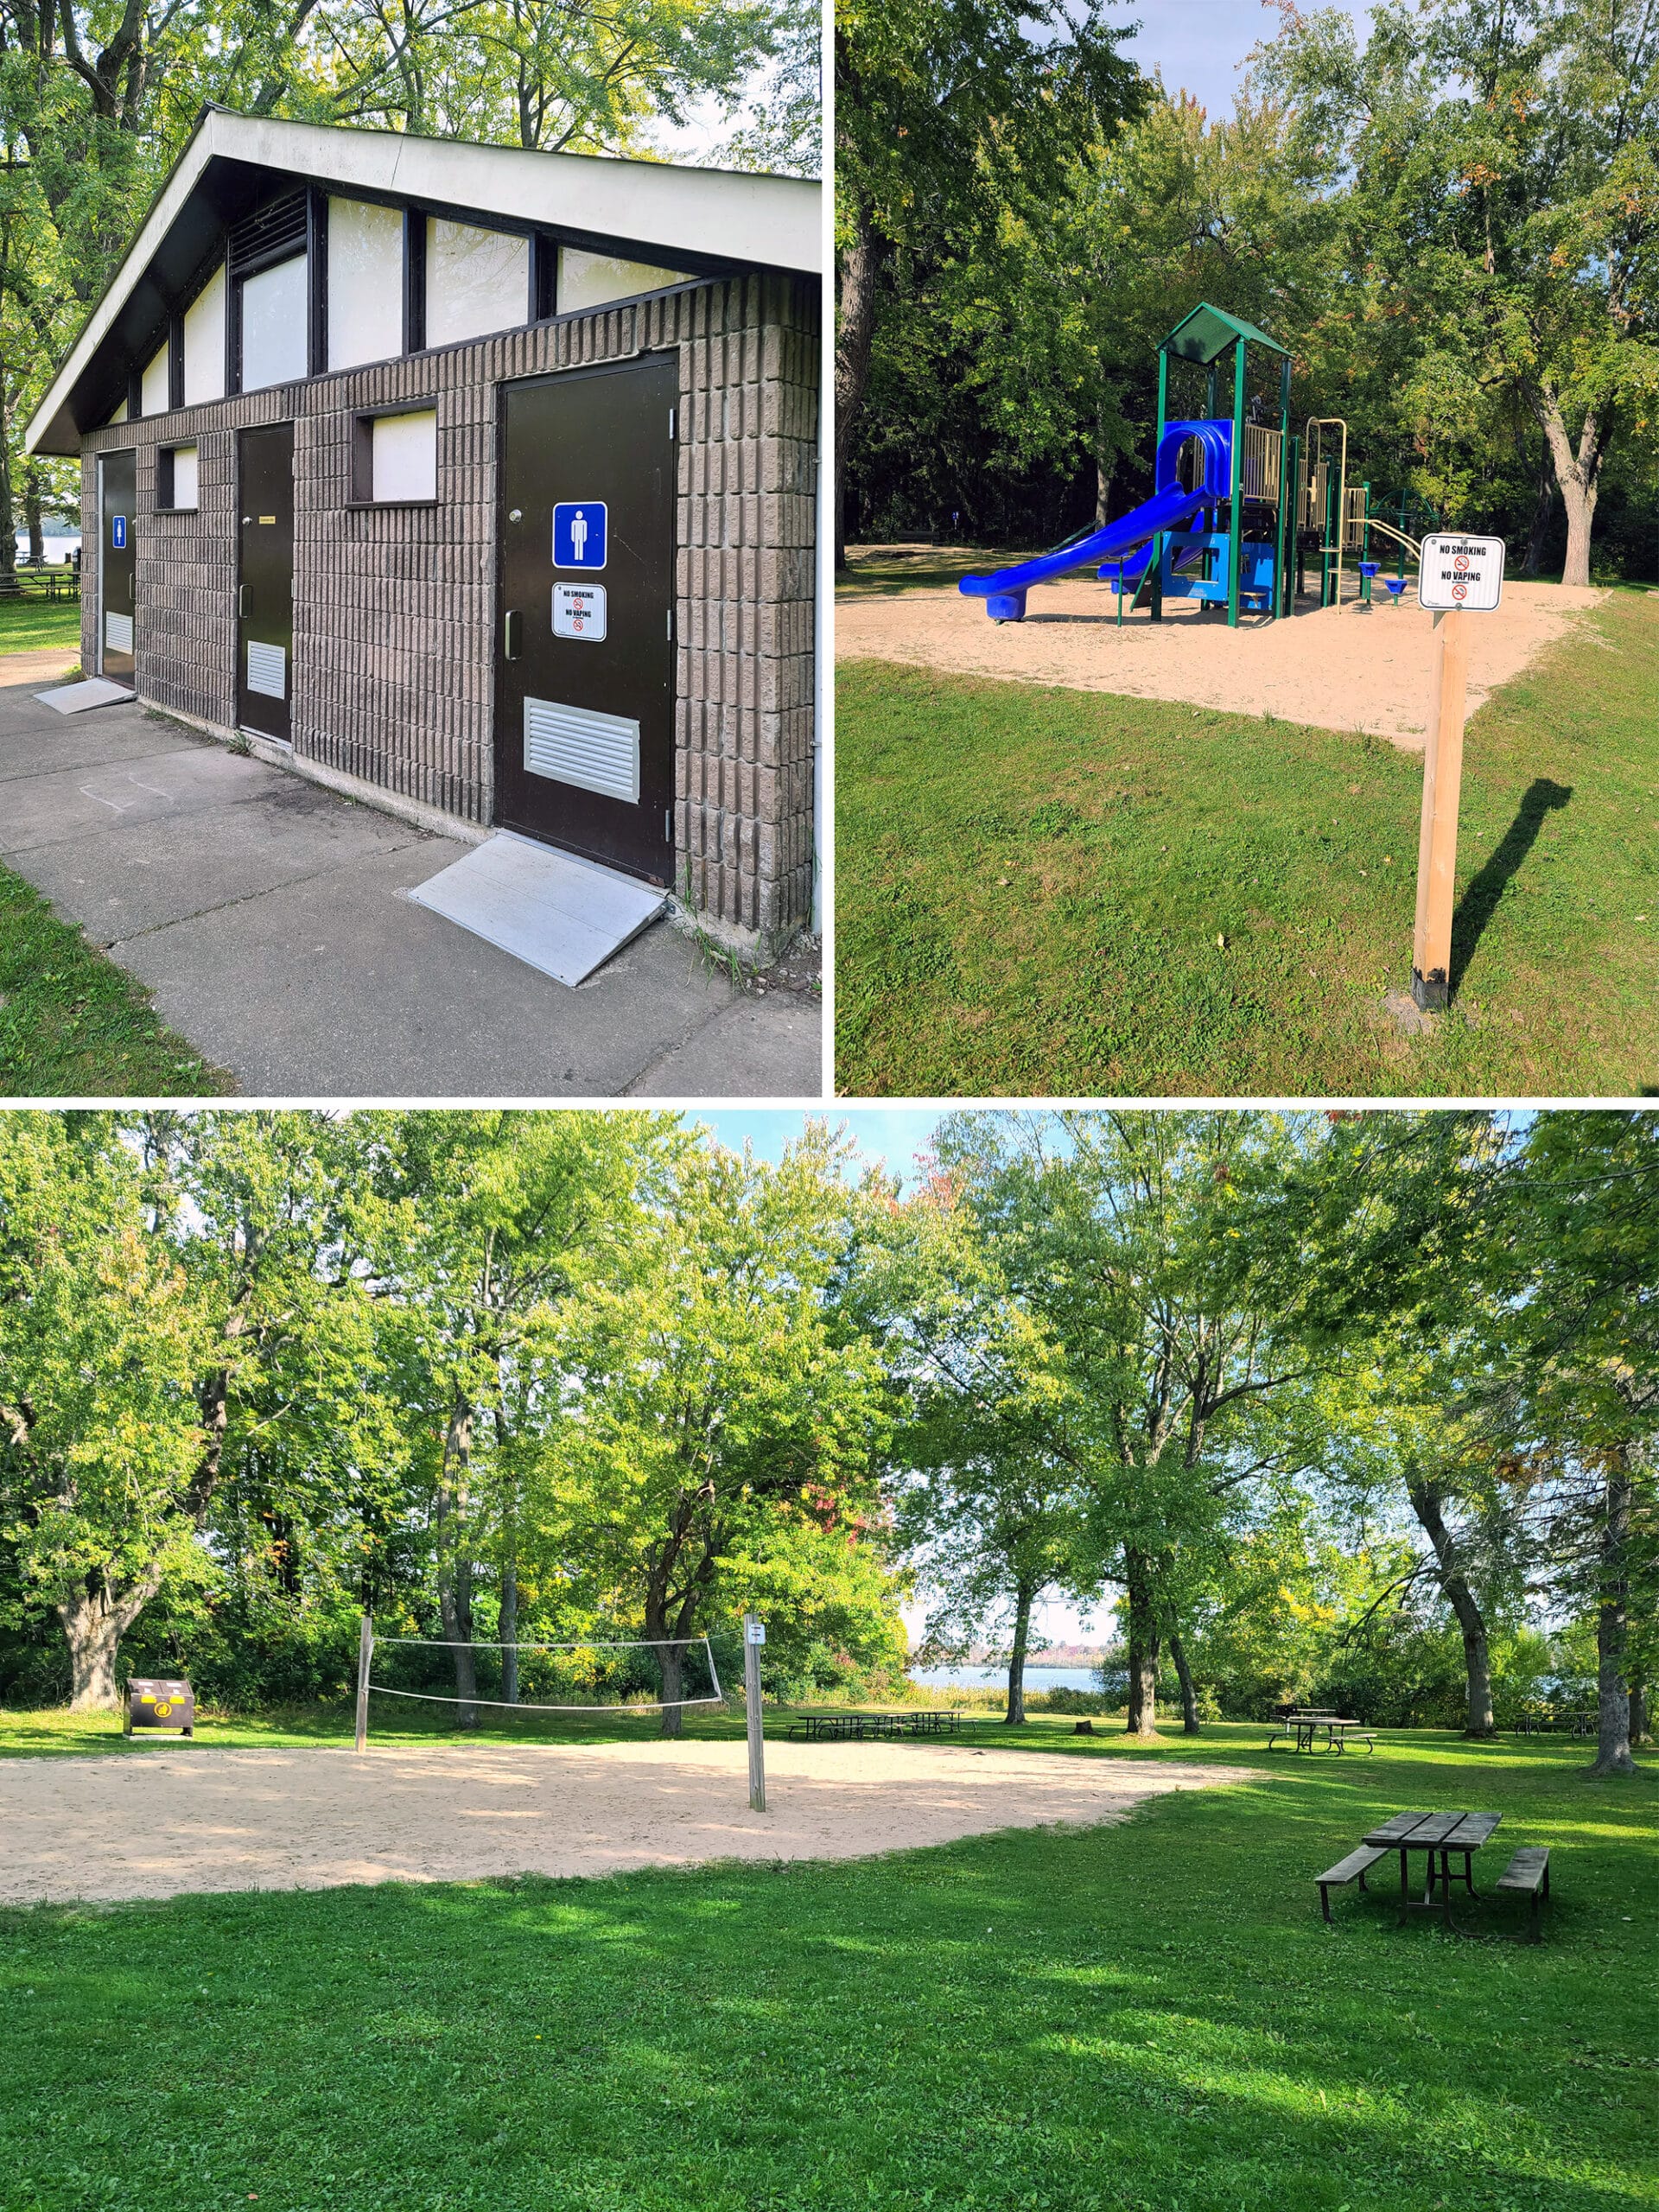 3 part image showing a limited comfort station, play ground, and volleyball net.